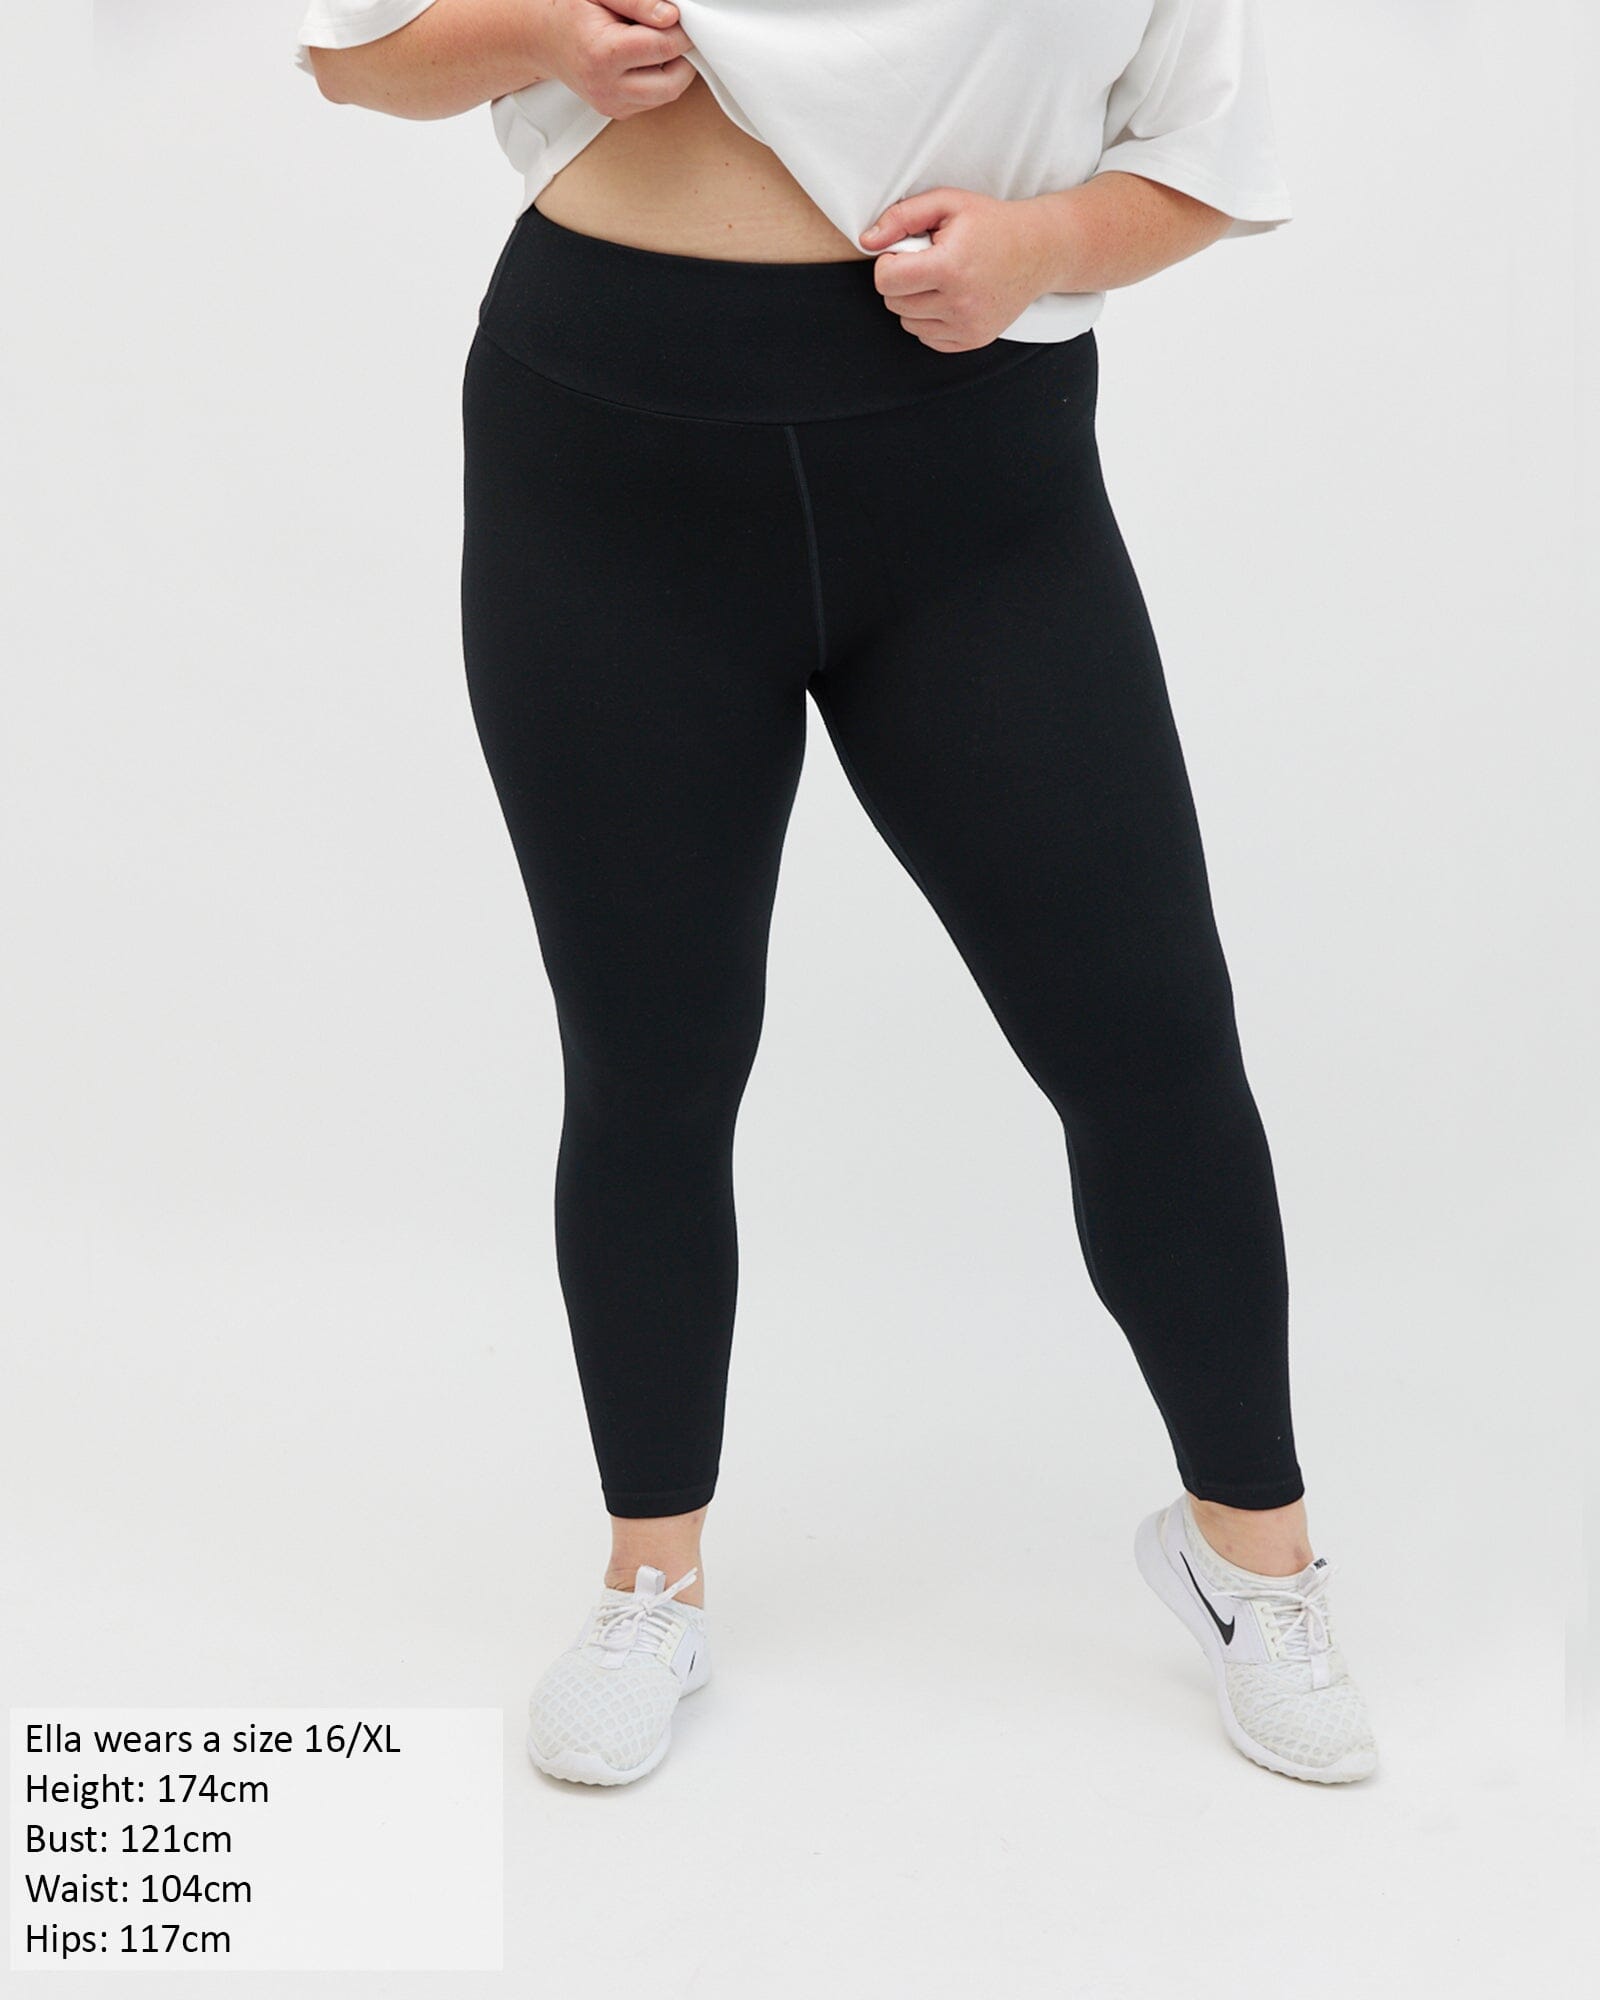 The ultimate comfy leggings - CROPPED Leggings Avila the label XL/16 Stretch 